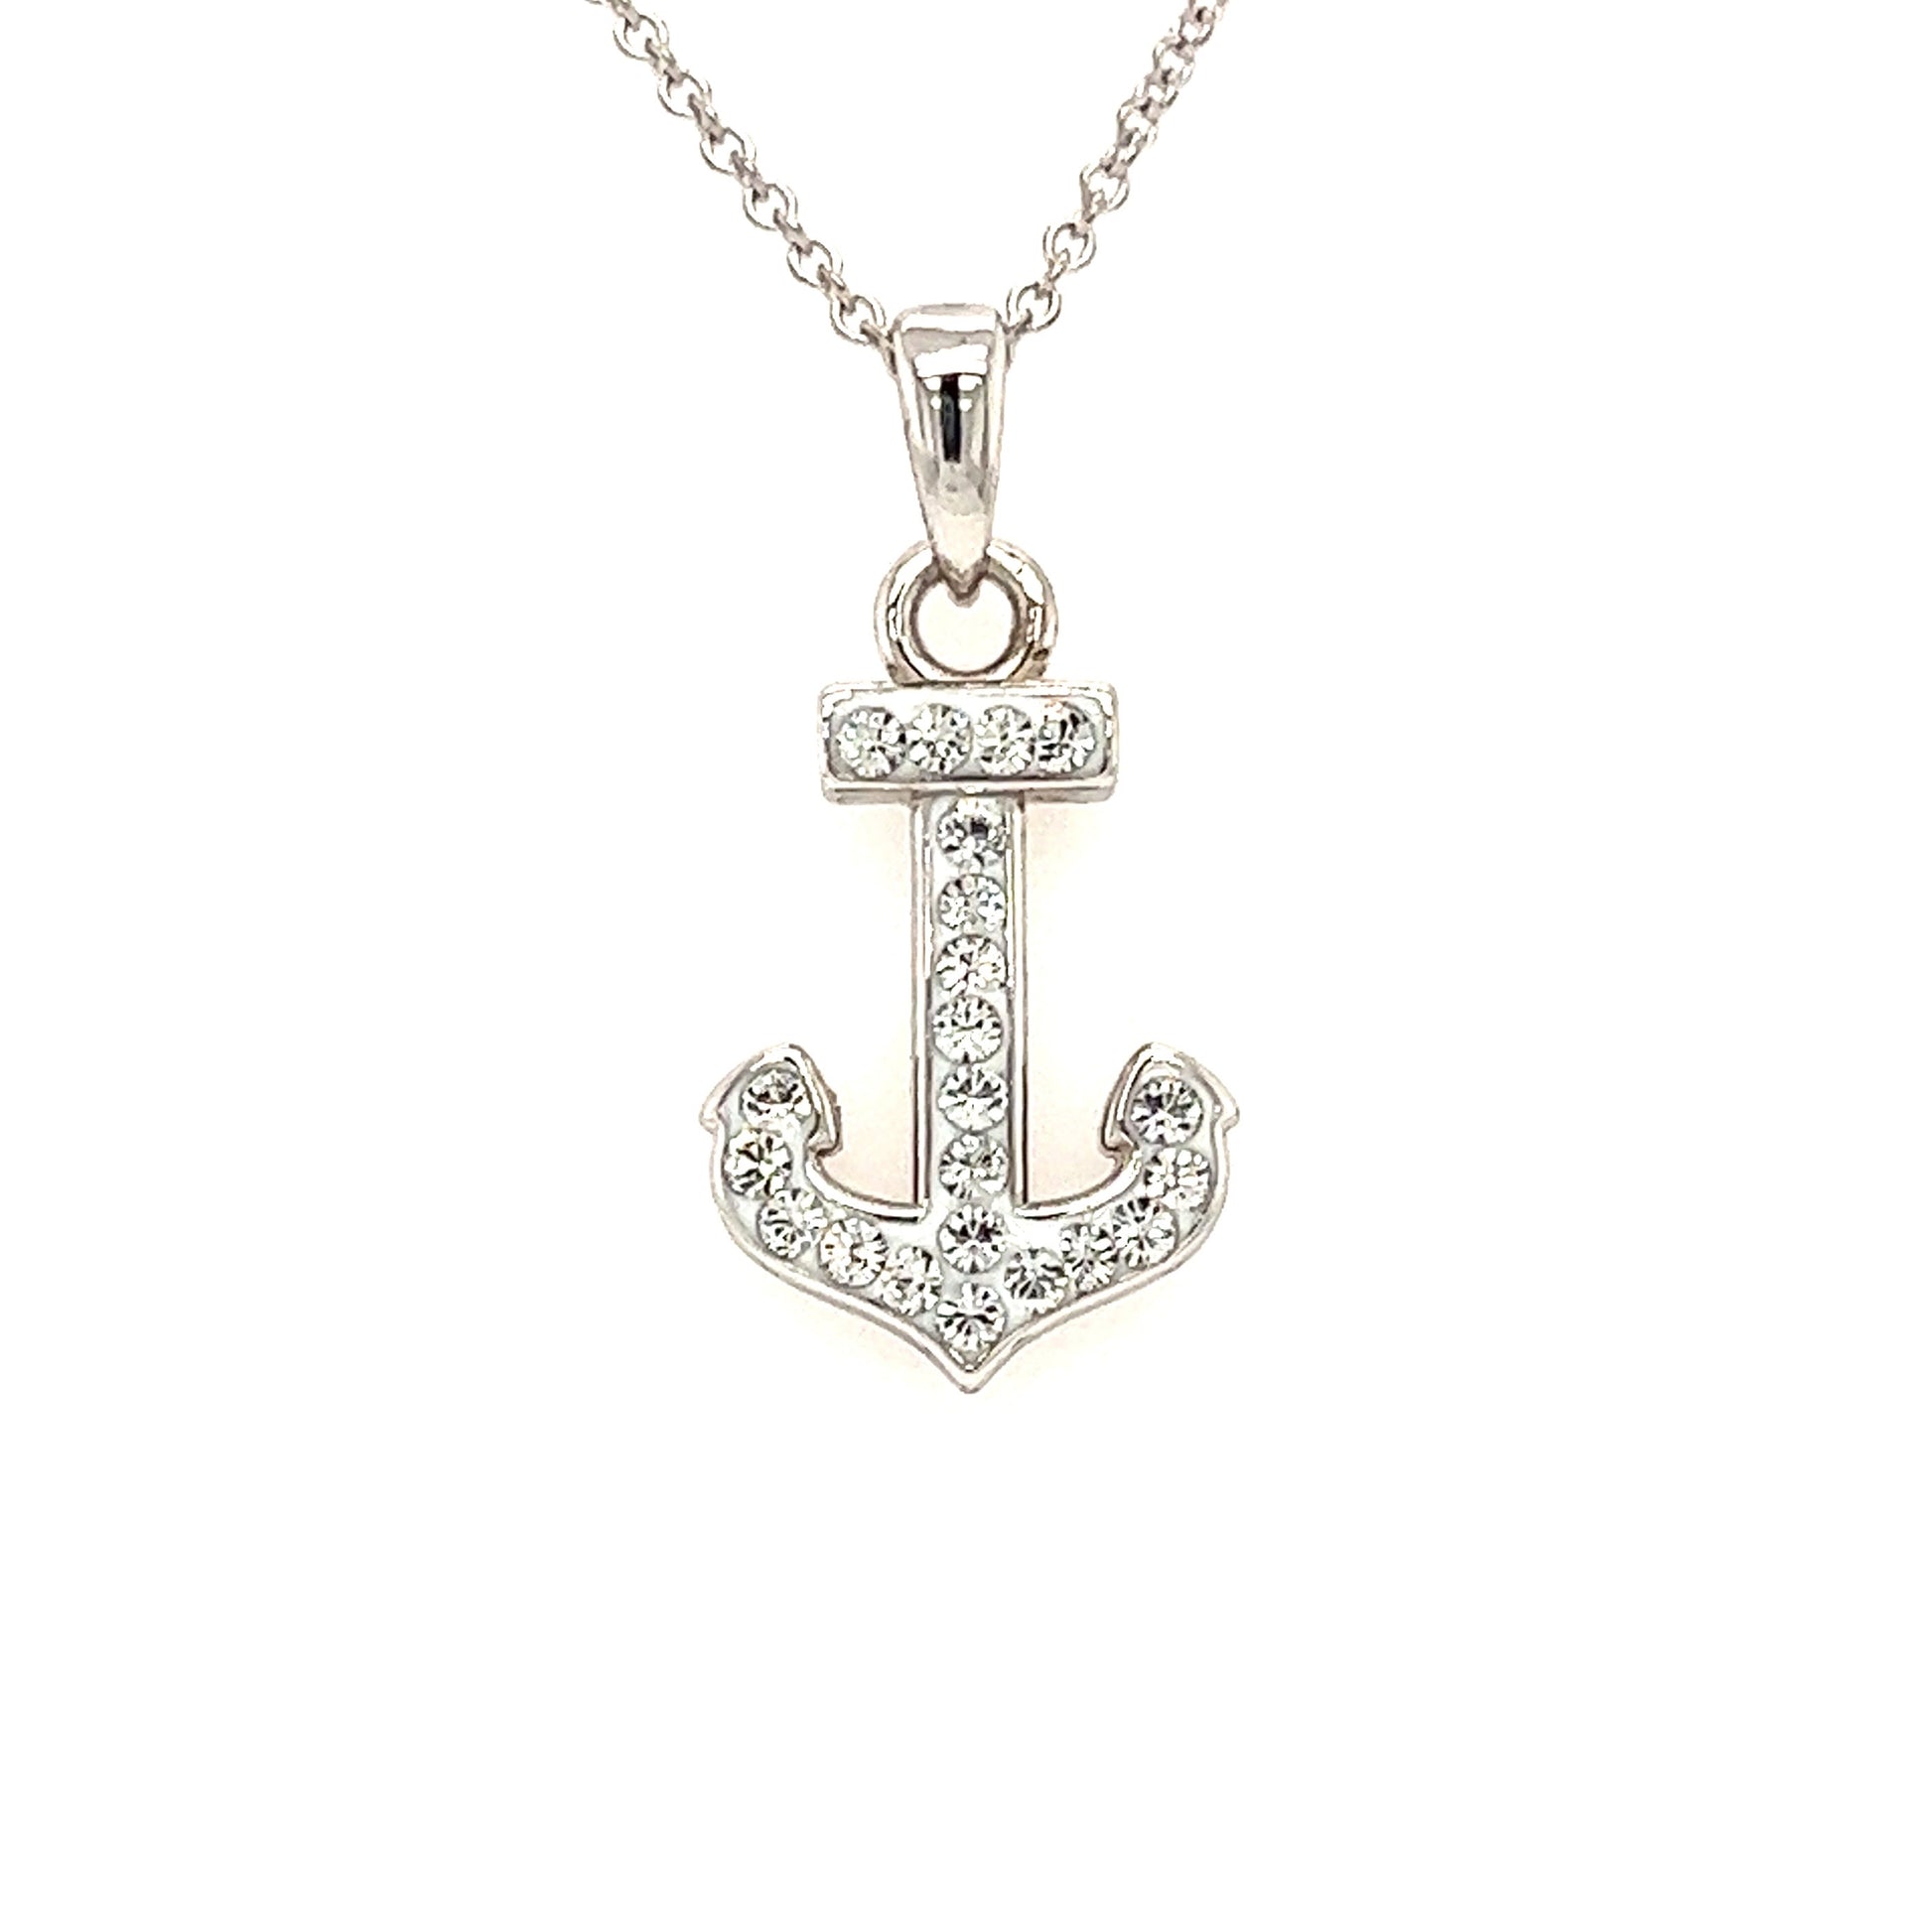 Anchor Necklace with White Crystals in Sterling Silver Necklace Front View